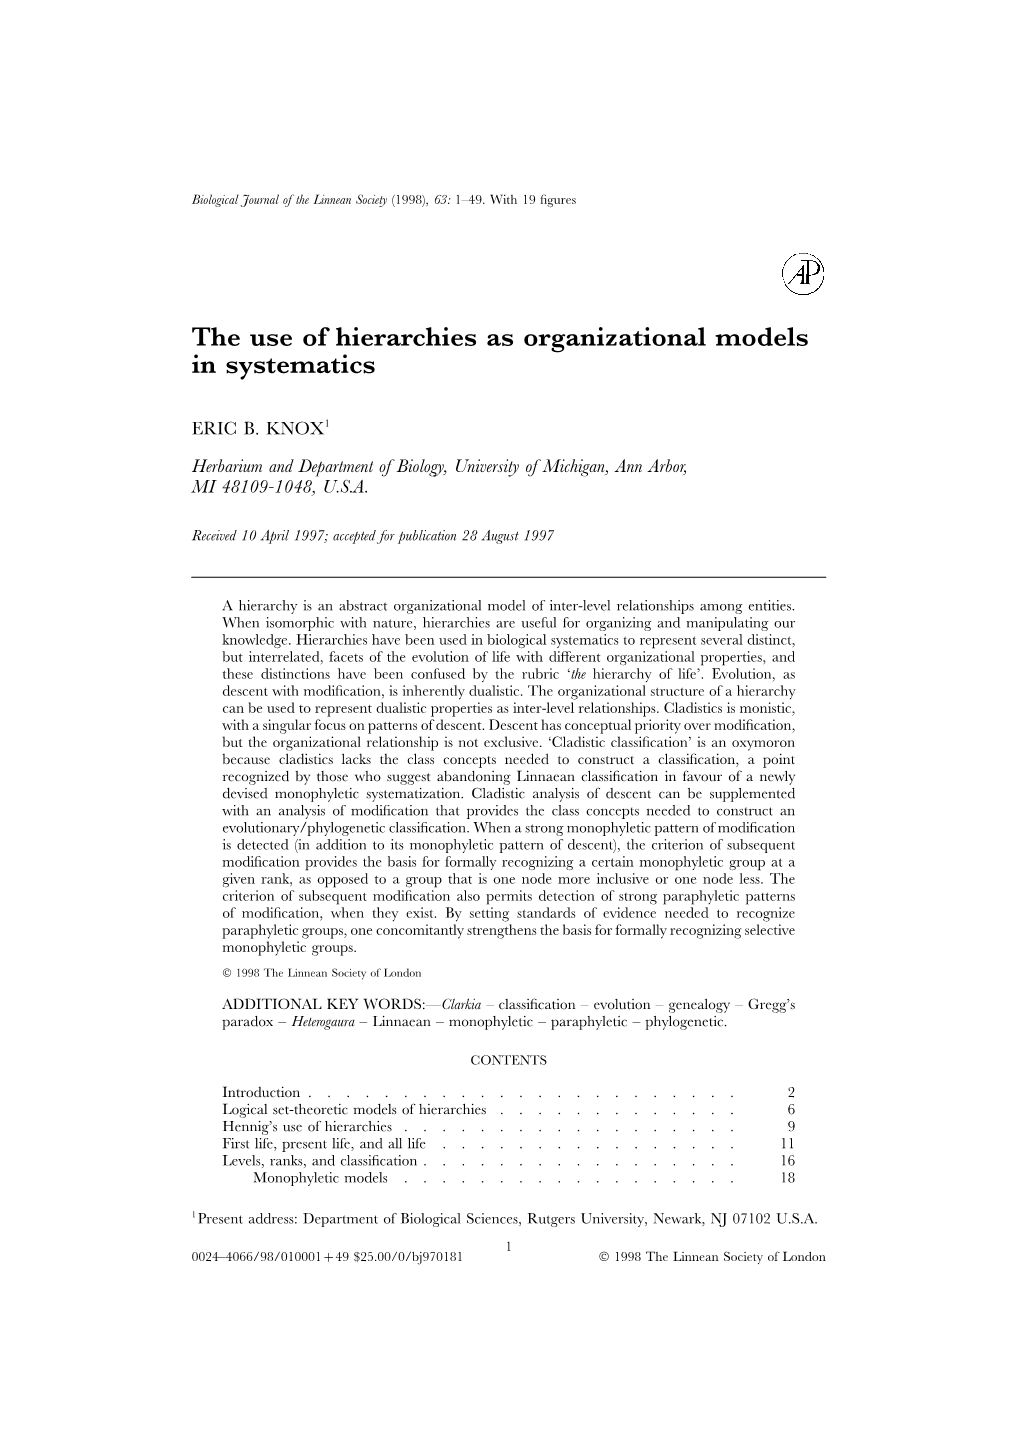 The Use of Hierarchies As Organizational Models in Systematics